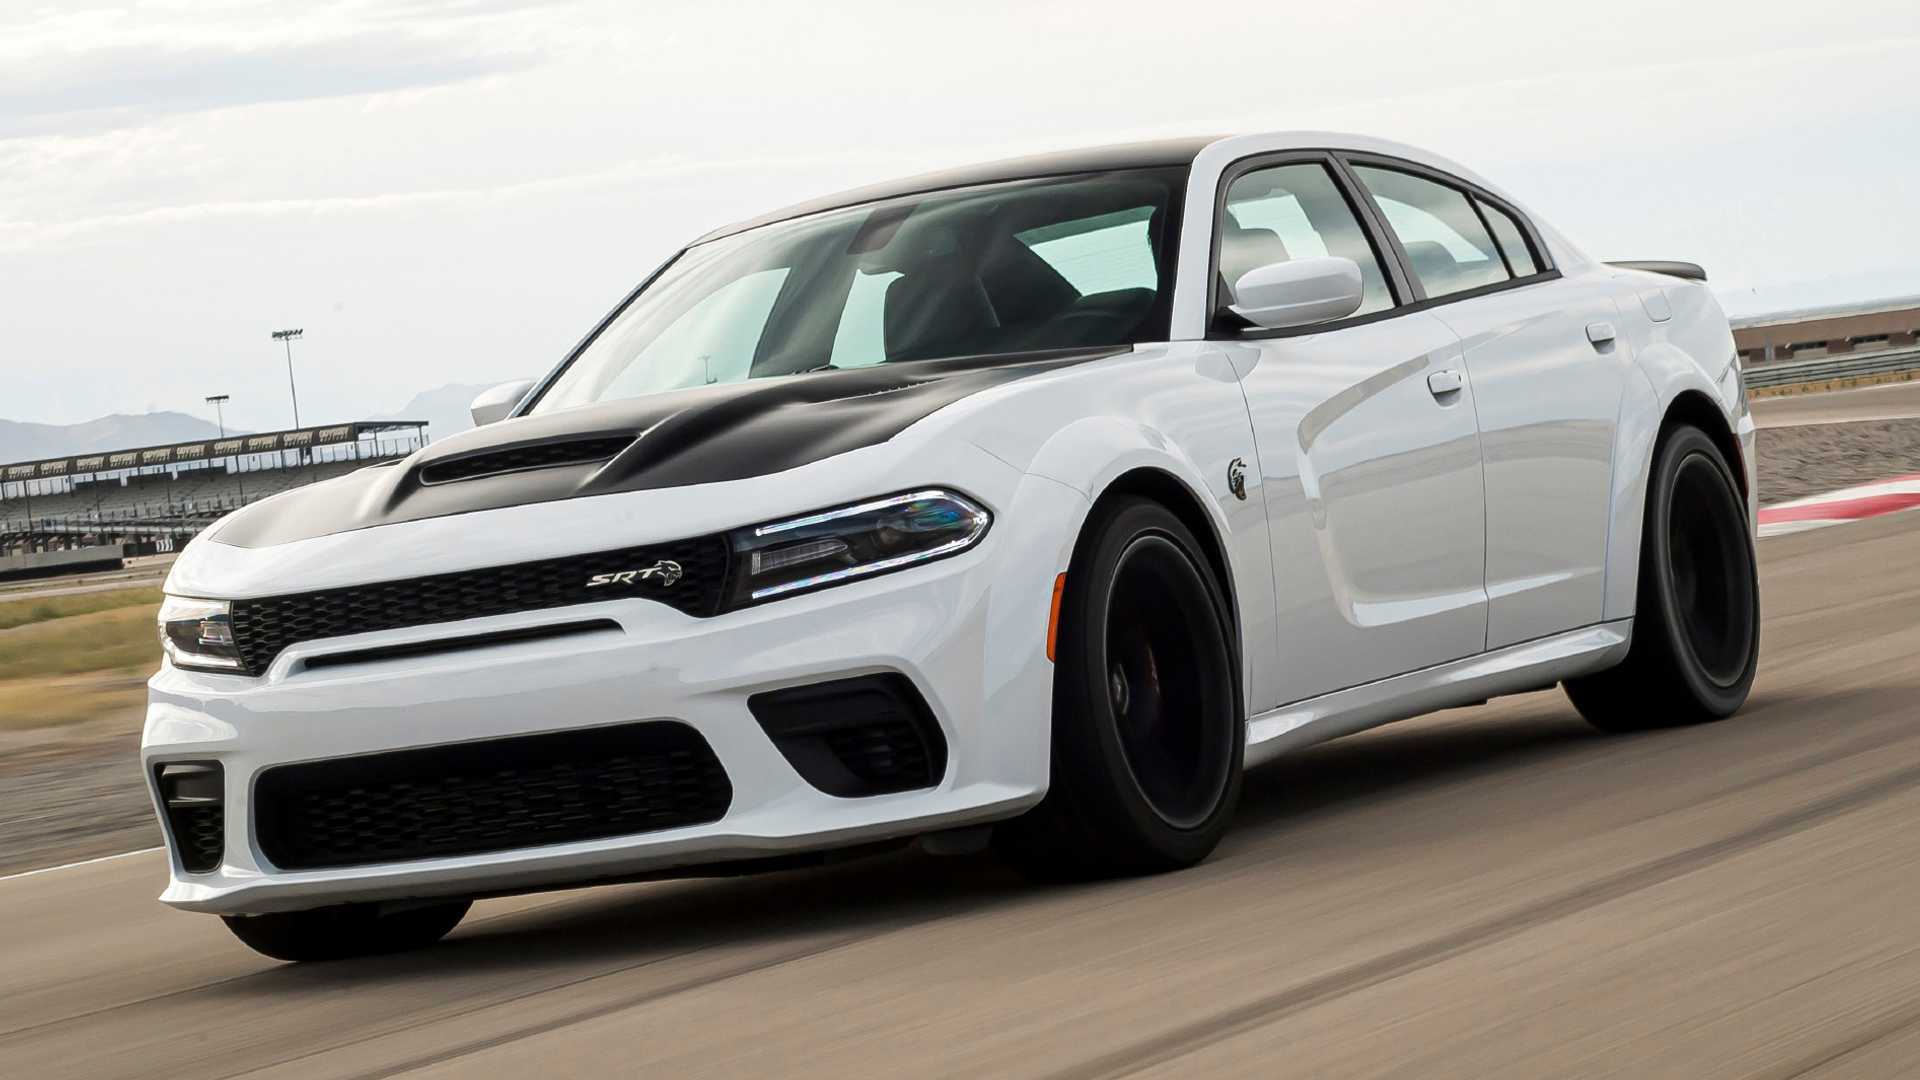 2021 Dodge Charger SRT Hellcat Redeye Debuts With 797 HP, Goes 203 MPH